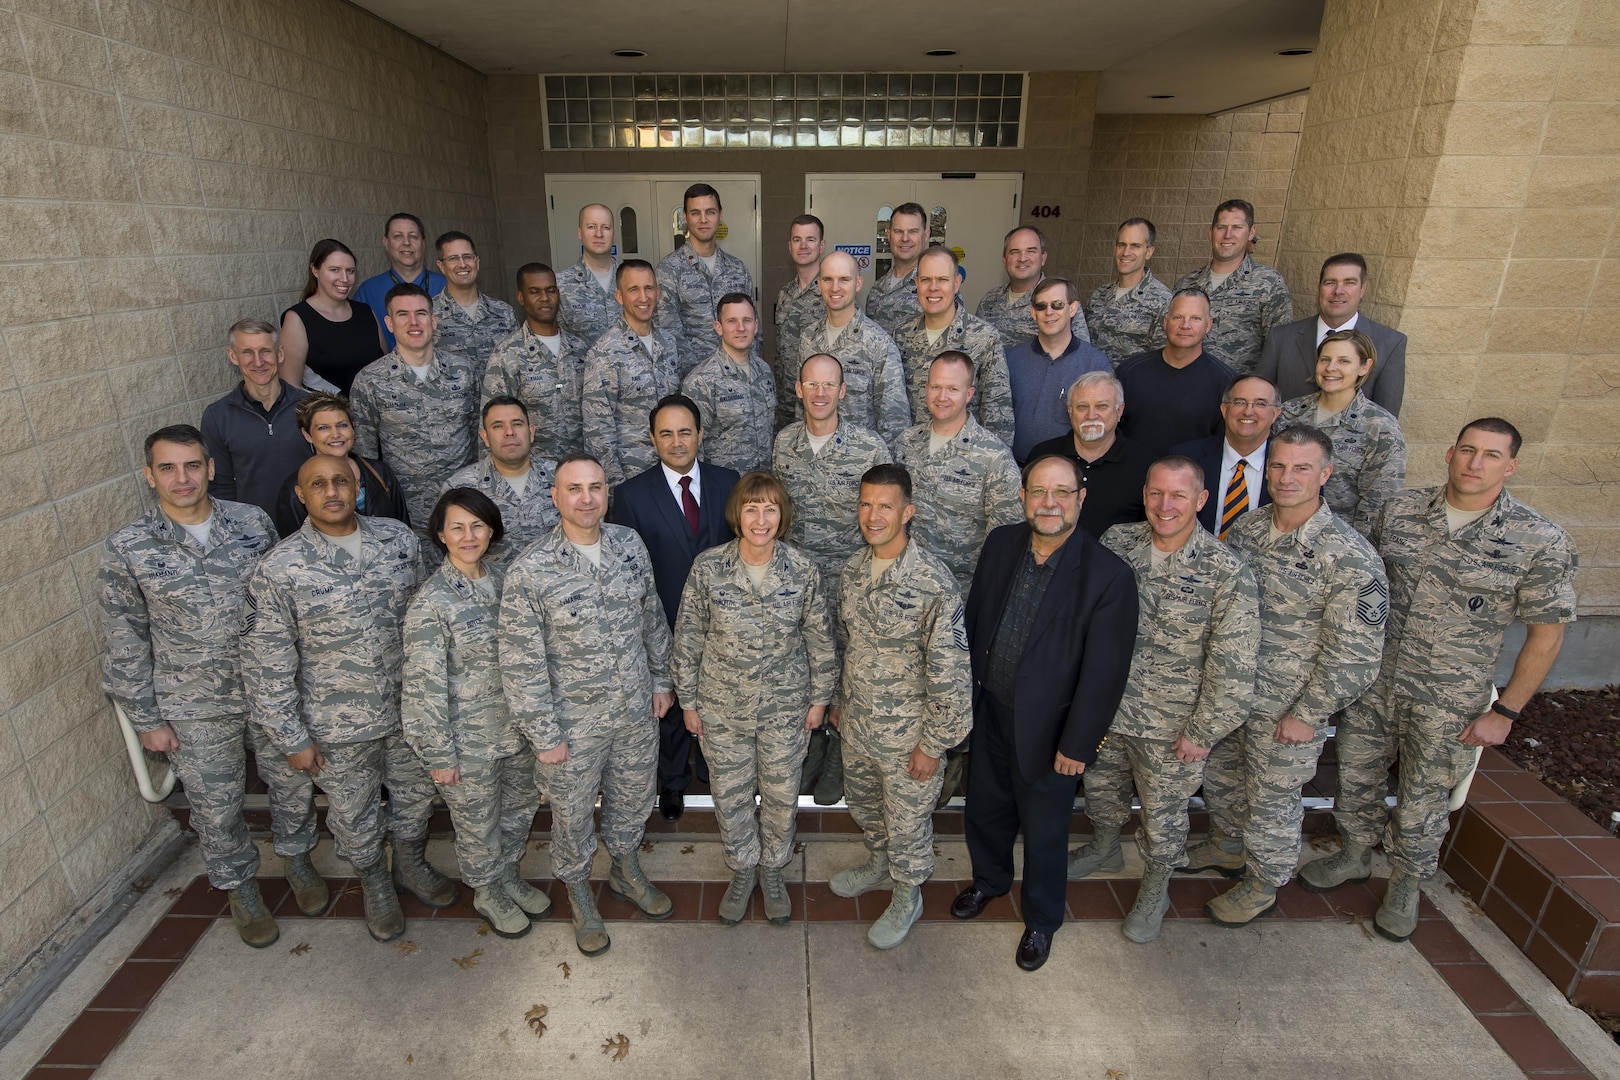 The 688th Cyberspace Wing poses for a group photo 27 Jan 2016. Under 24th Air Force, the 688th is mission critical in denying adversaries freedom to maneuver on cyber key terrain (U.S. photo by MSgt Luke Thelen). 